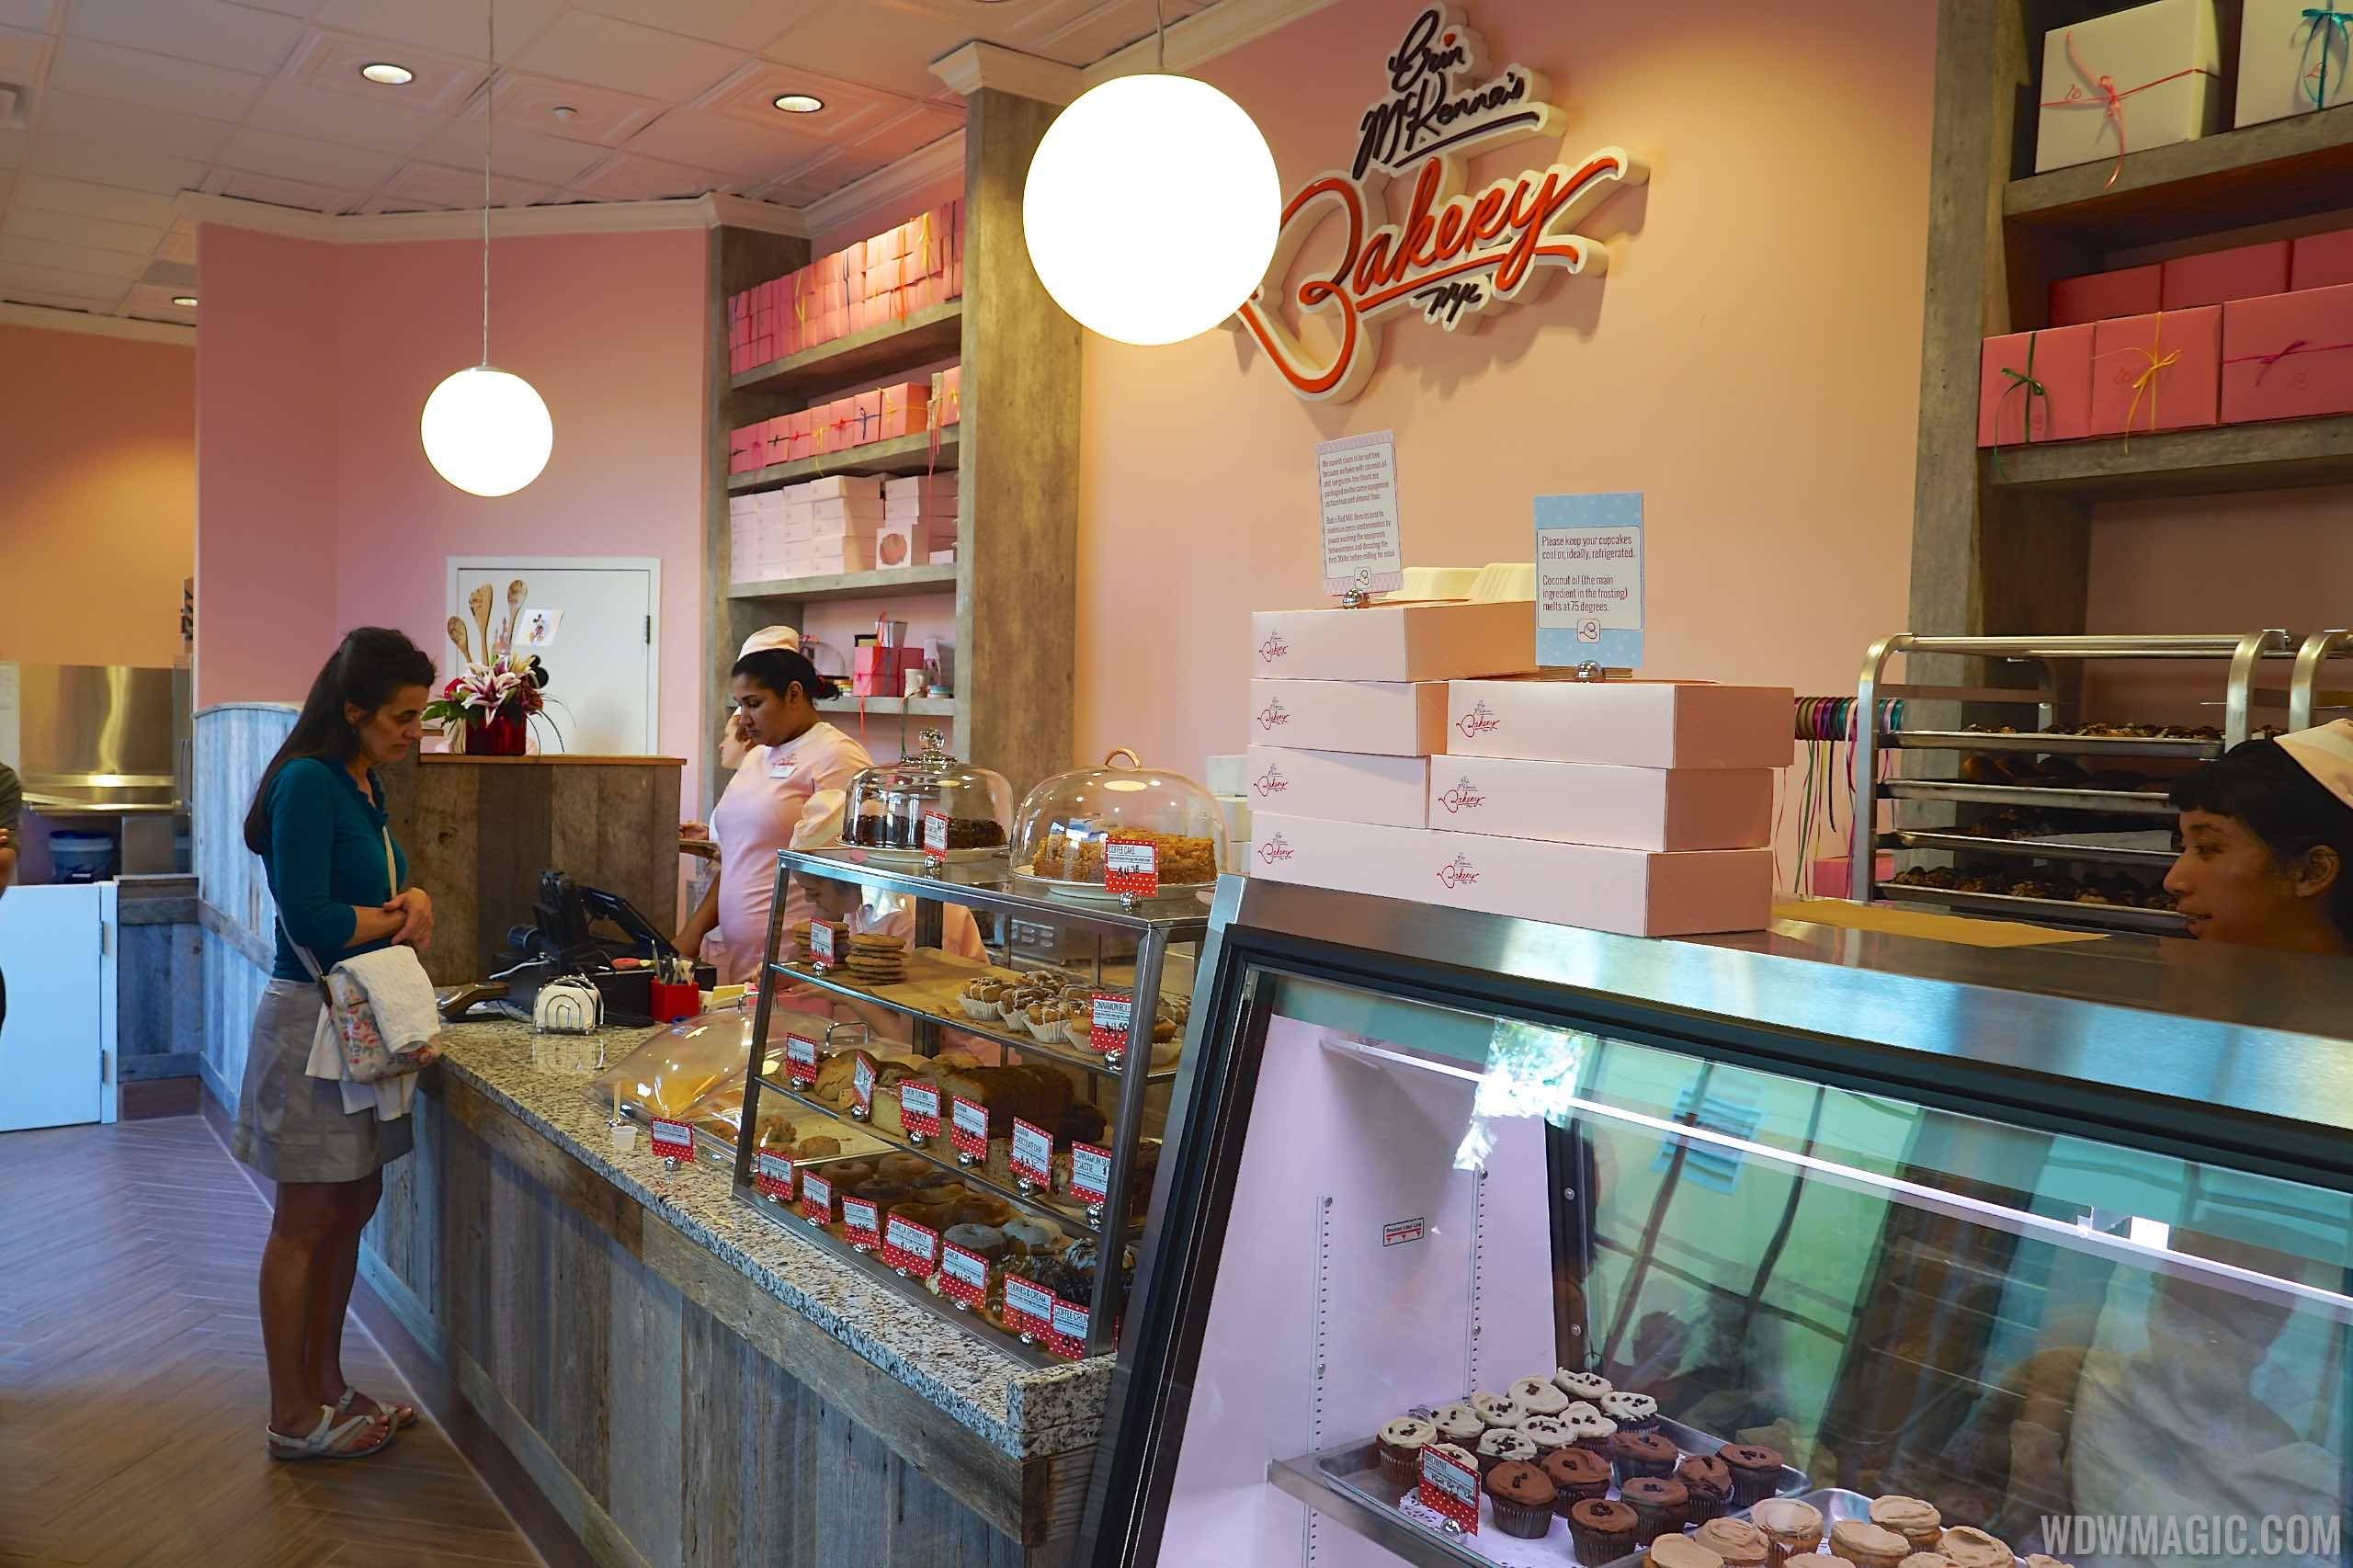 PHOTOS - Signs up at Erin McKenna's NYC Bakery